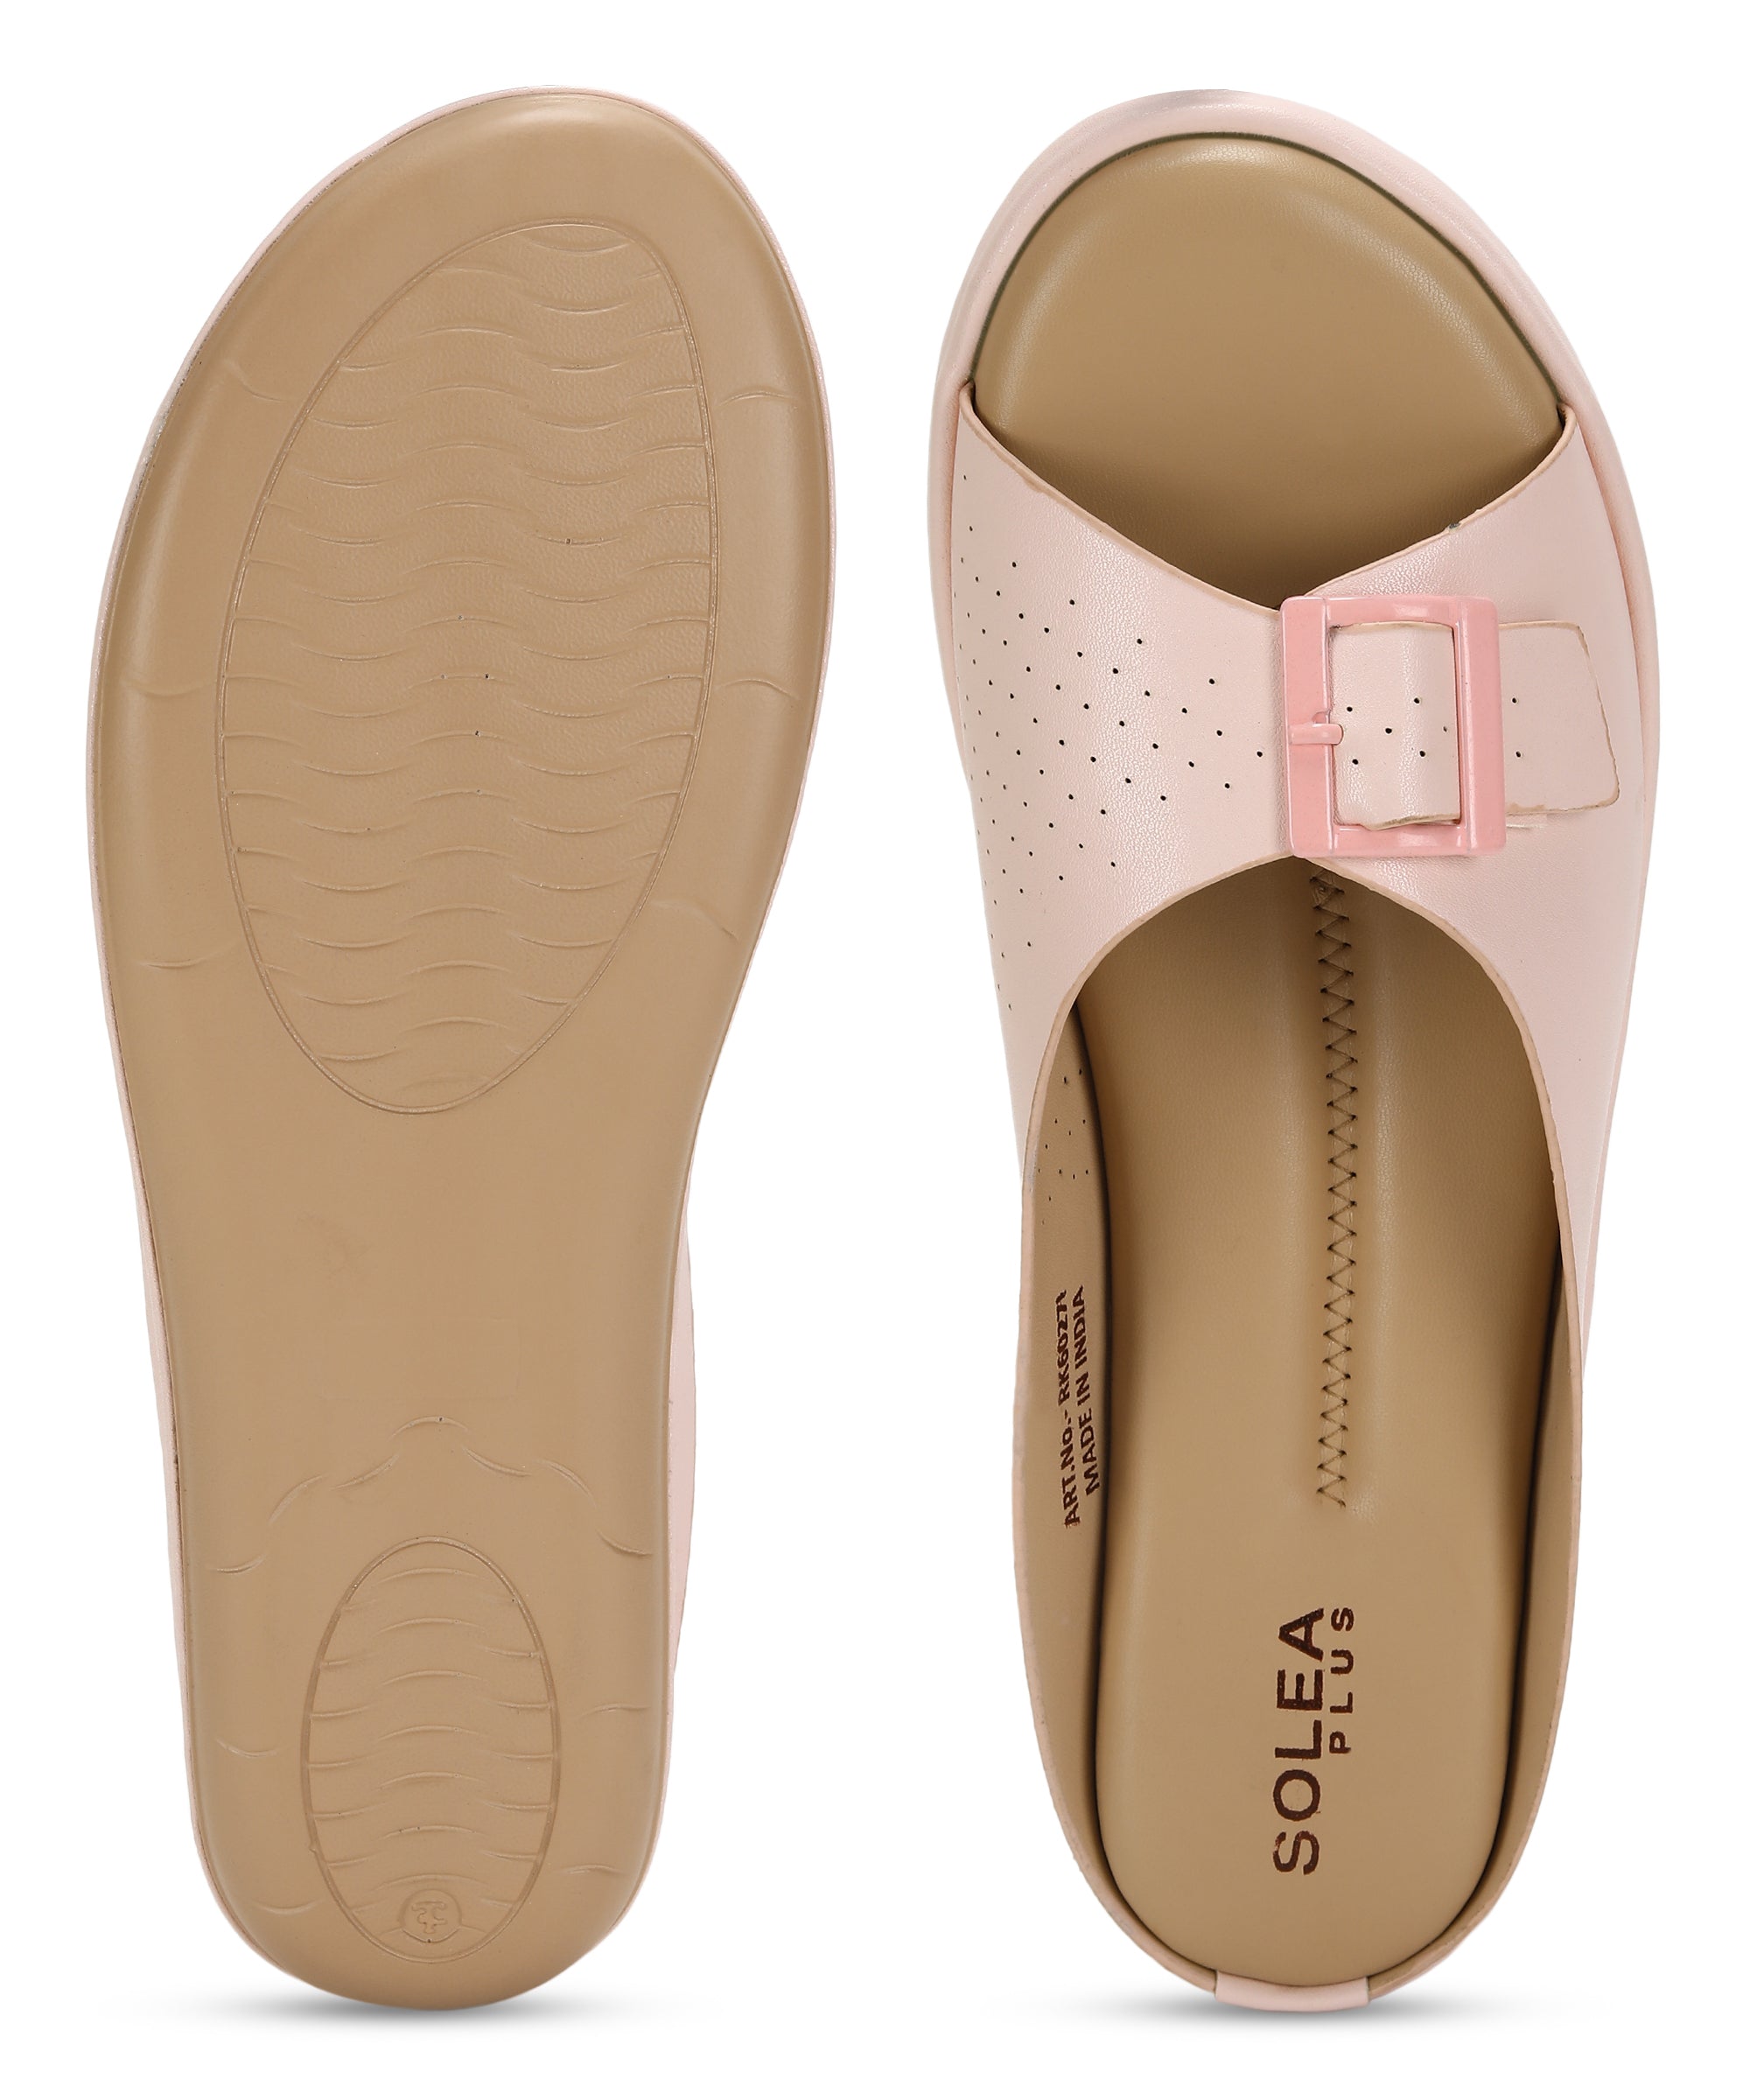 Paragon RK6027L Women Sandals | Casual &amp; Formal Sandals | Stylish, Comfortable &amp; Durable | For Daily &amp; Occasion Wear